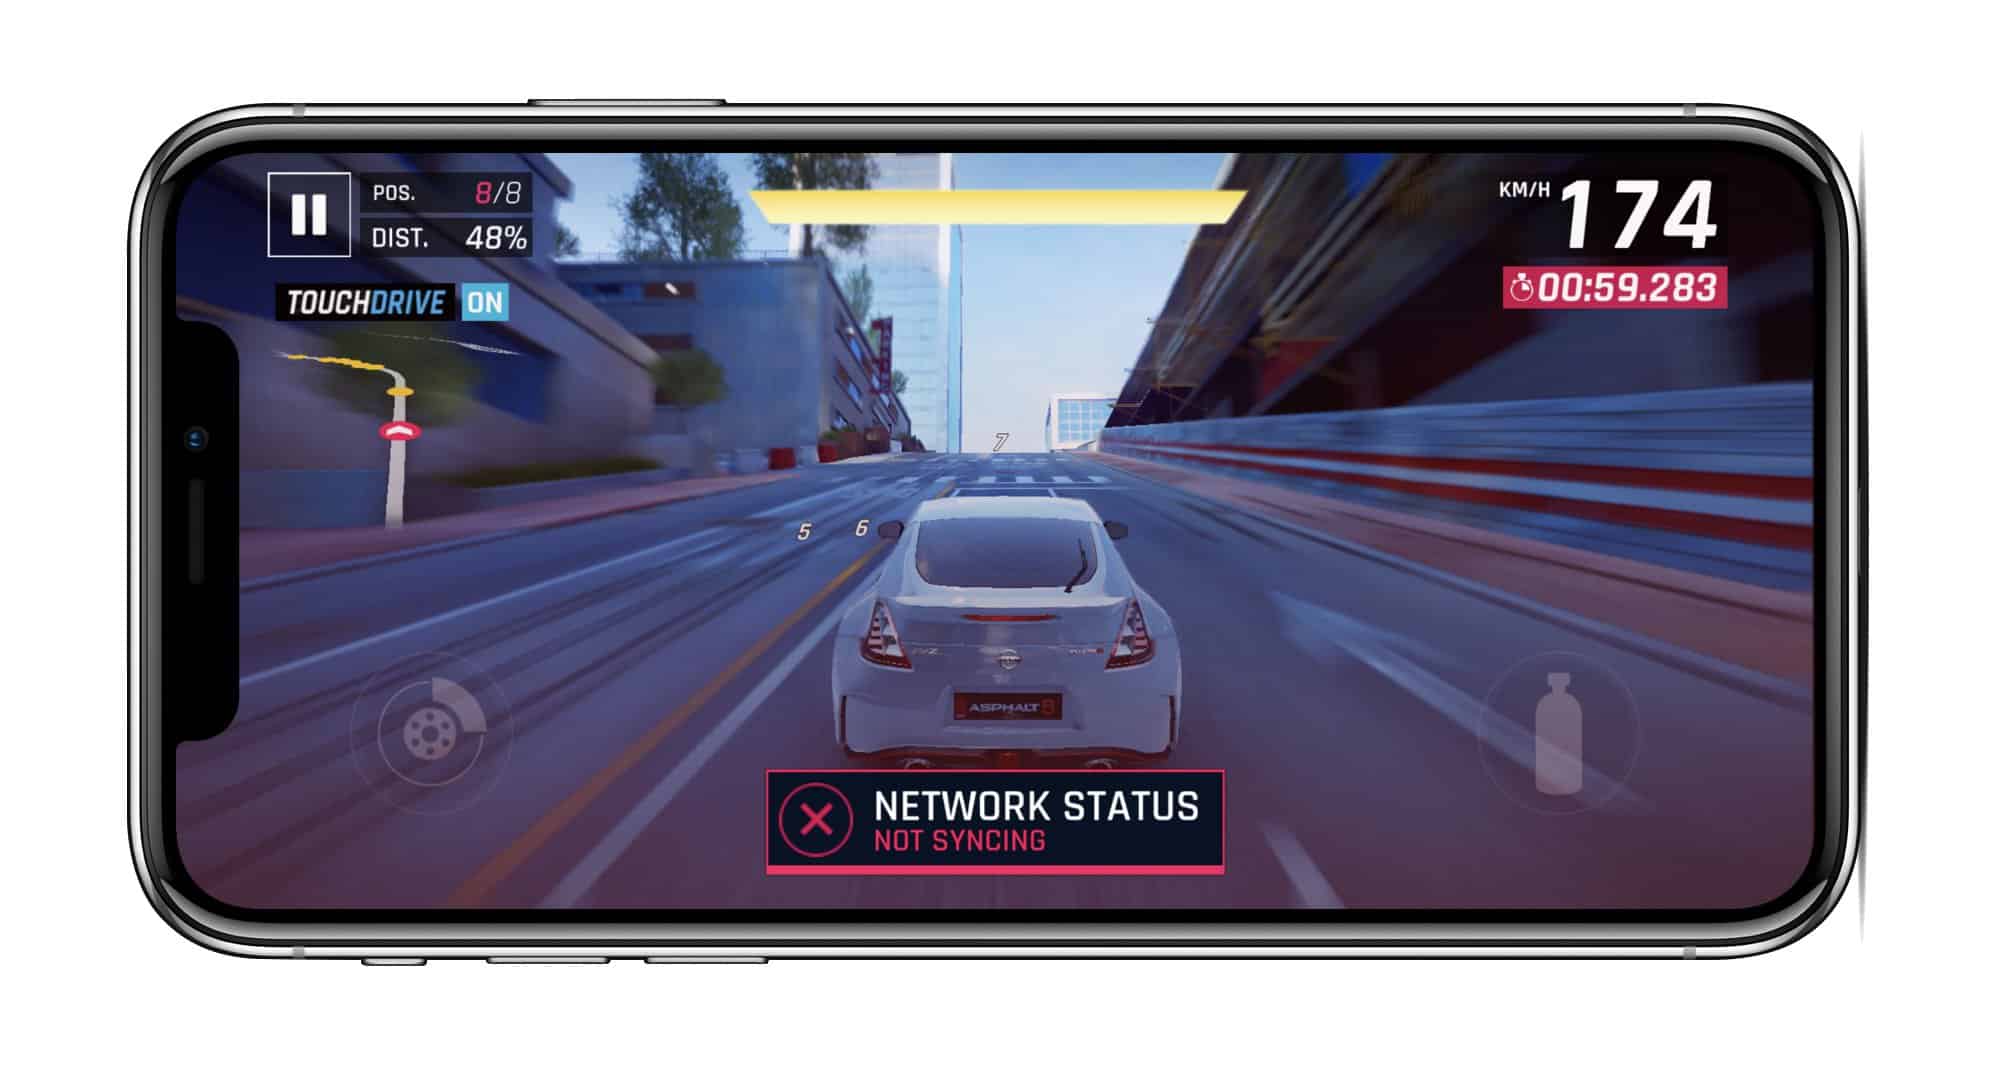 How to Fix Asphalt 9 "Not syncing" Network Status Error